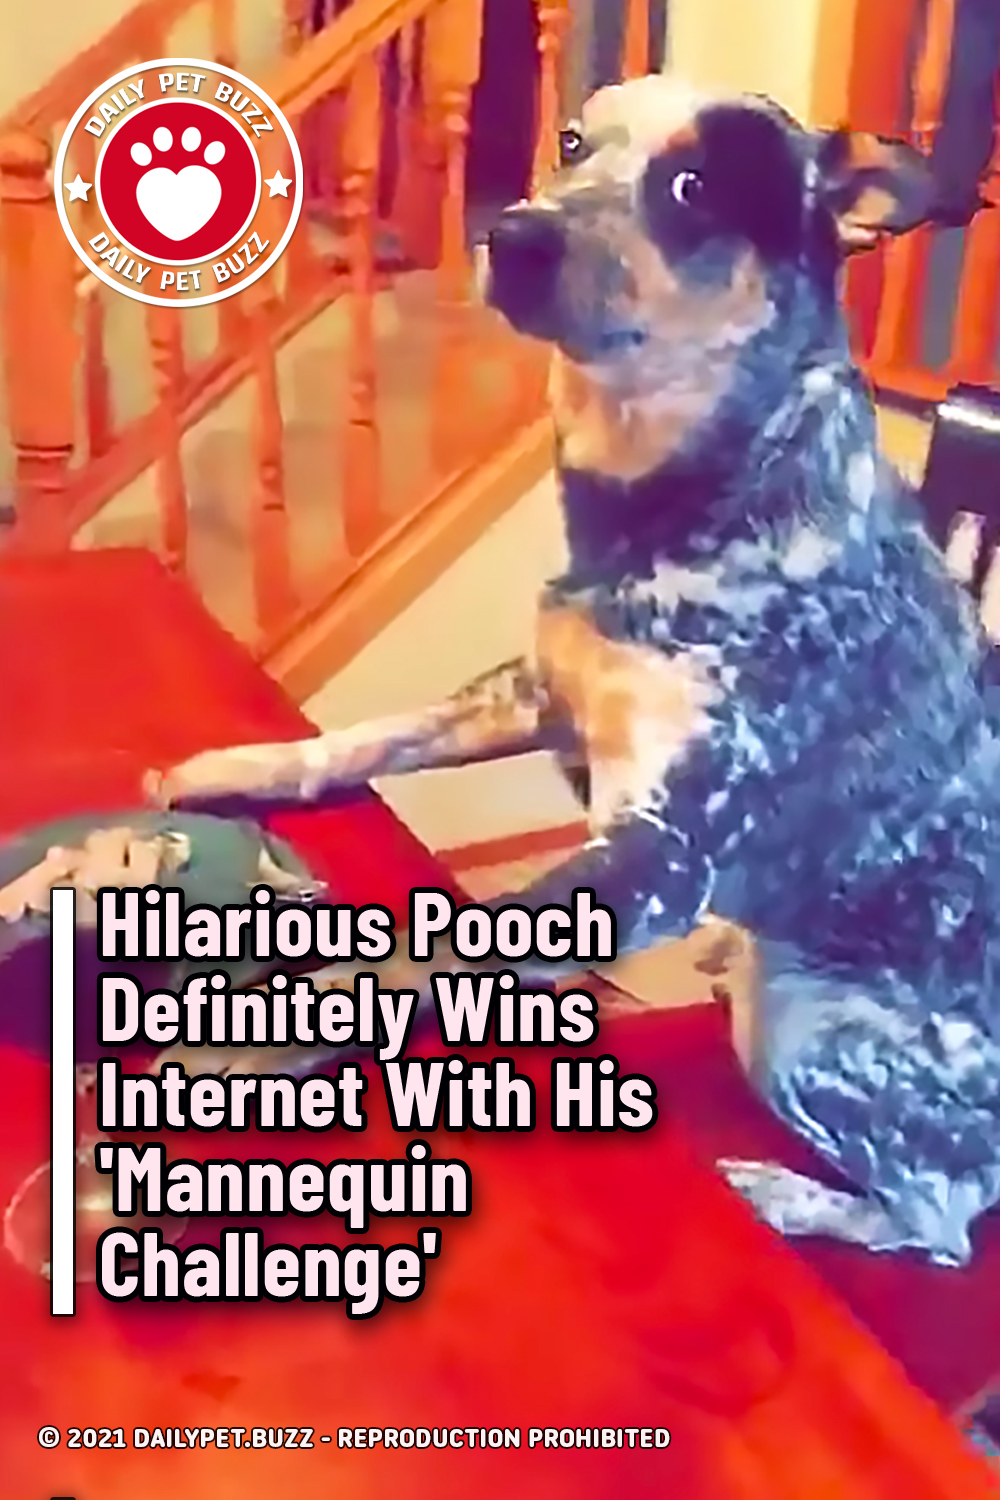 Hilarious Pooch Definitely Wins Internet With His \'Mannequin Challenge\'